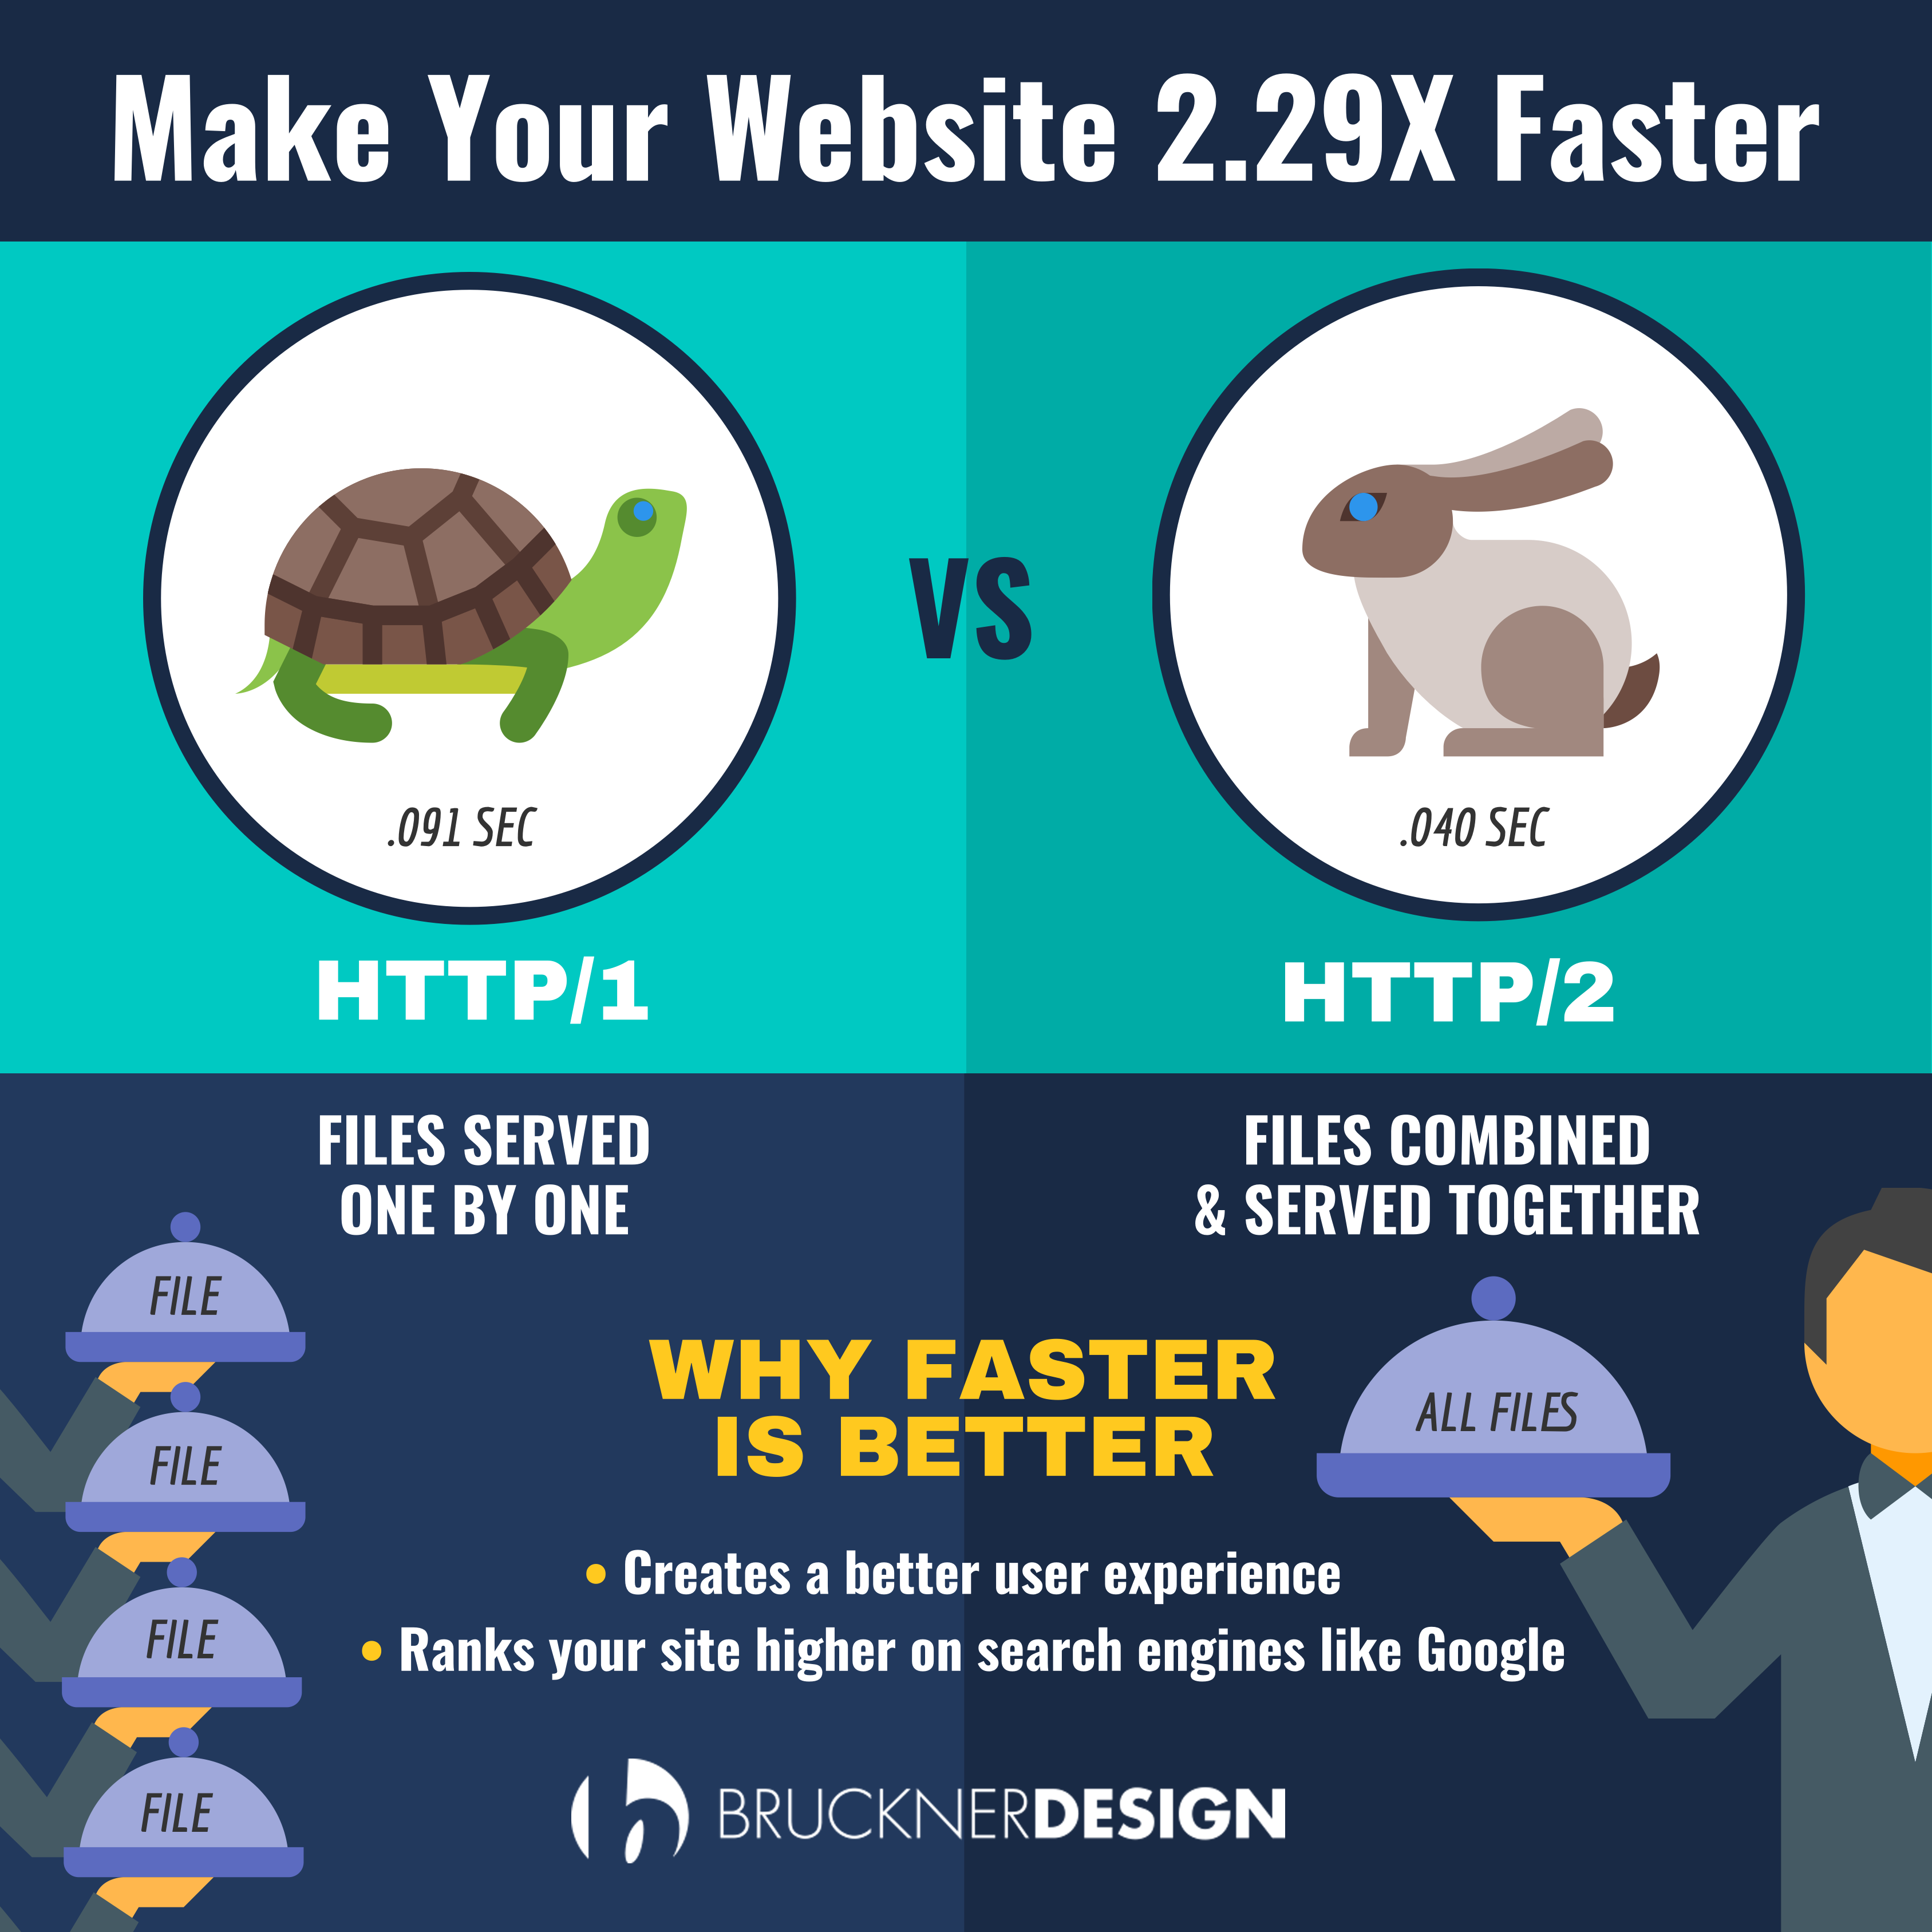 Make Your Website More than 2X Faster